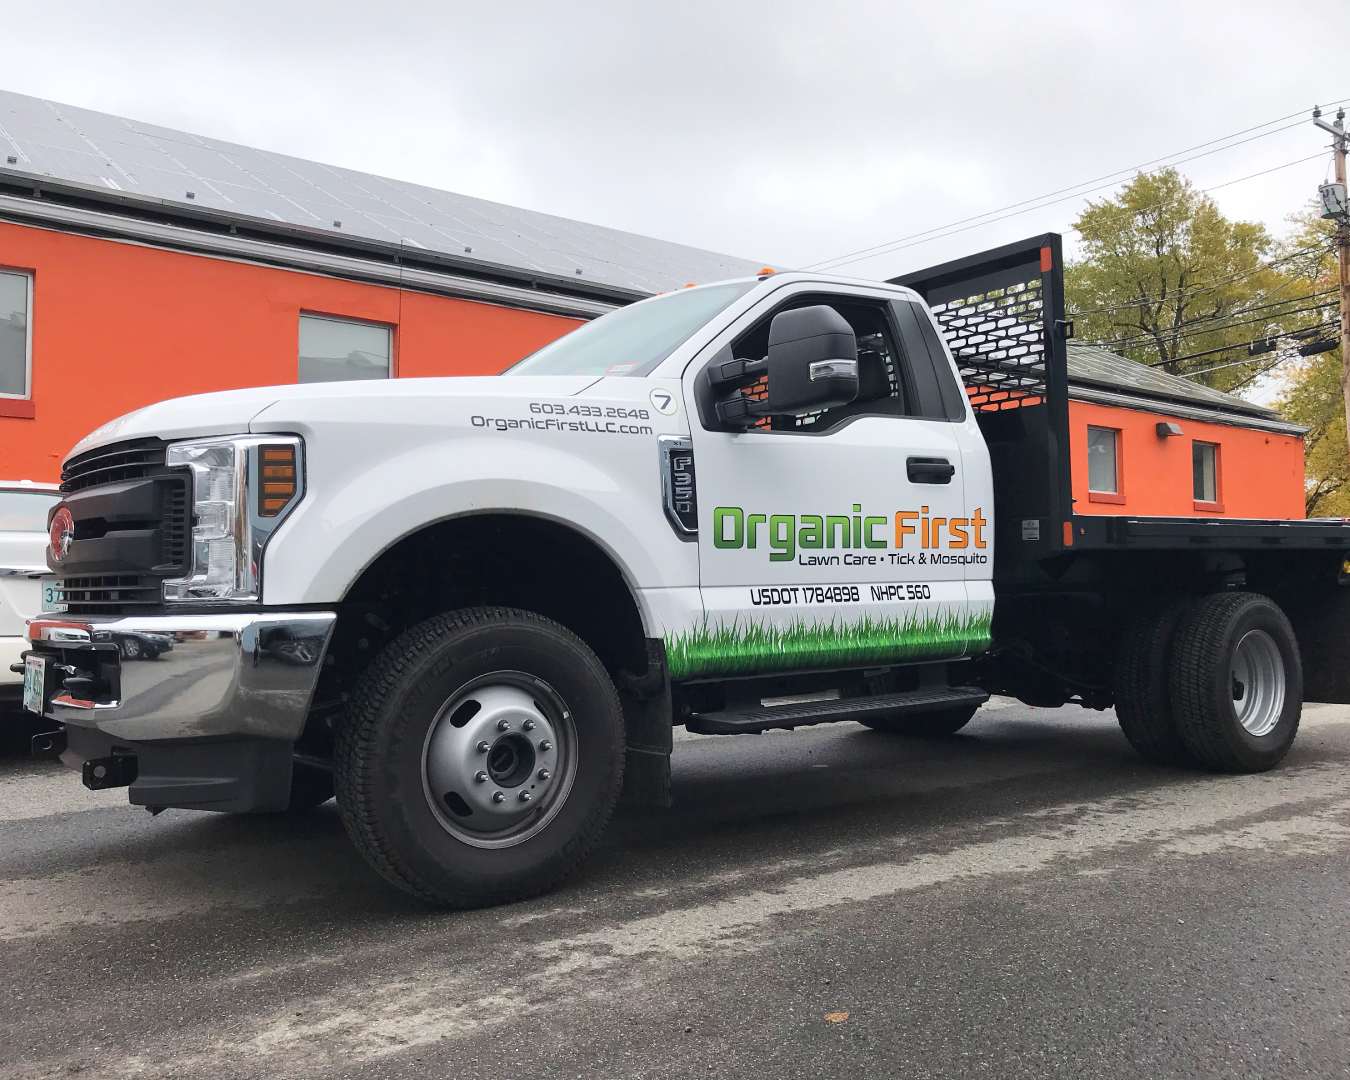 Organic First Truck wrap custom designed vehicle wrap by Alphagraphics Portsmouth